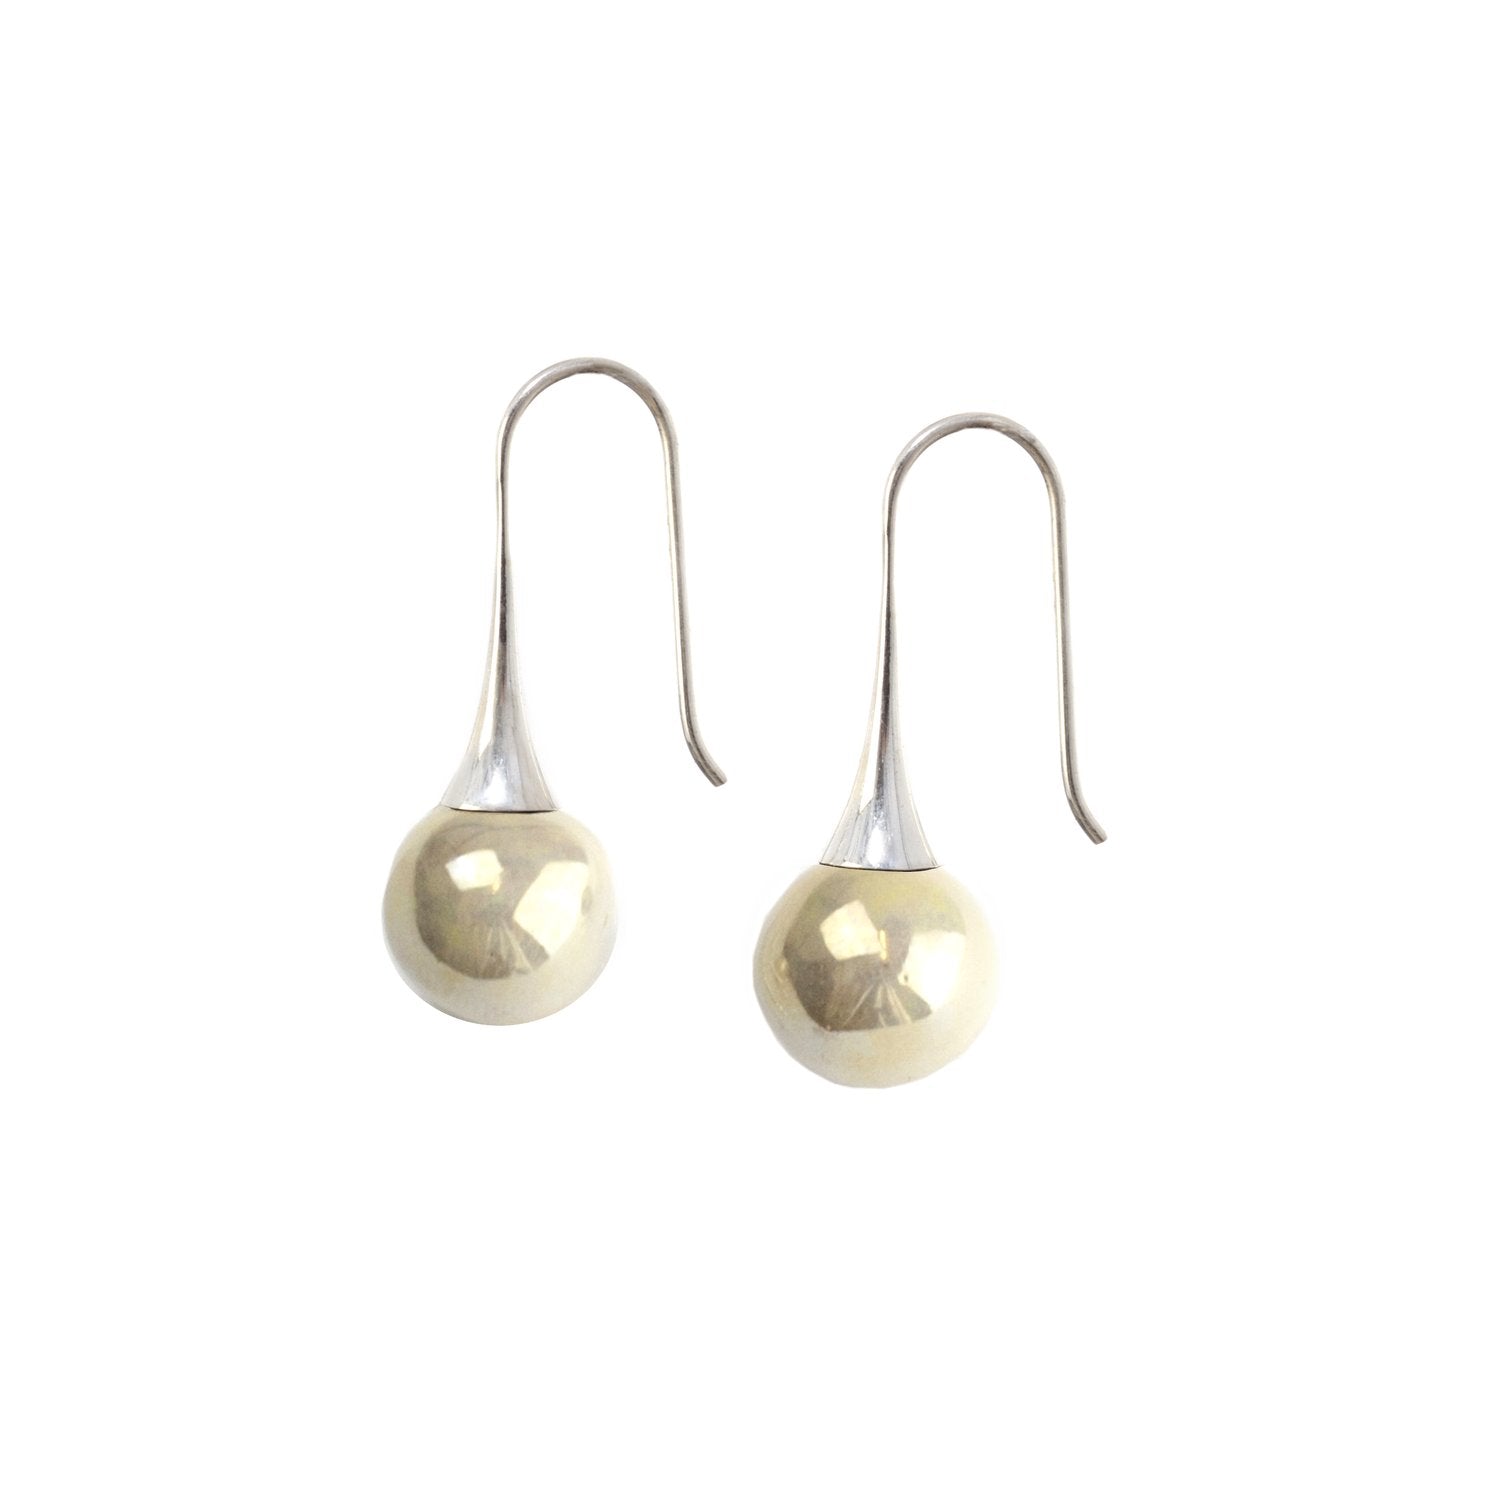 Pierre Gevaux earrings are handcrafted in france and made of ceramic